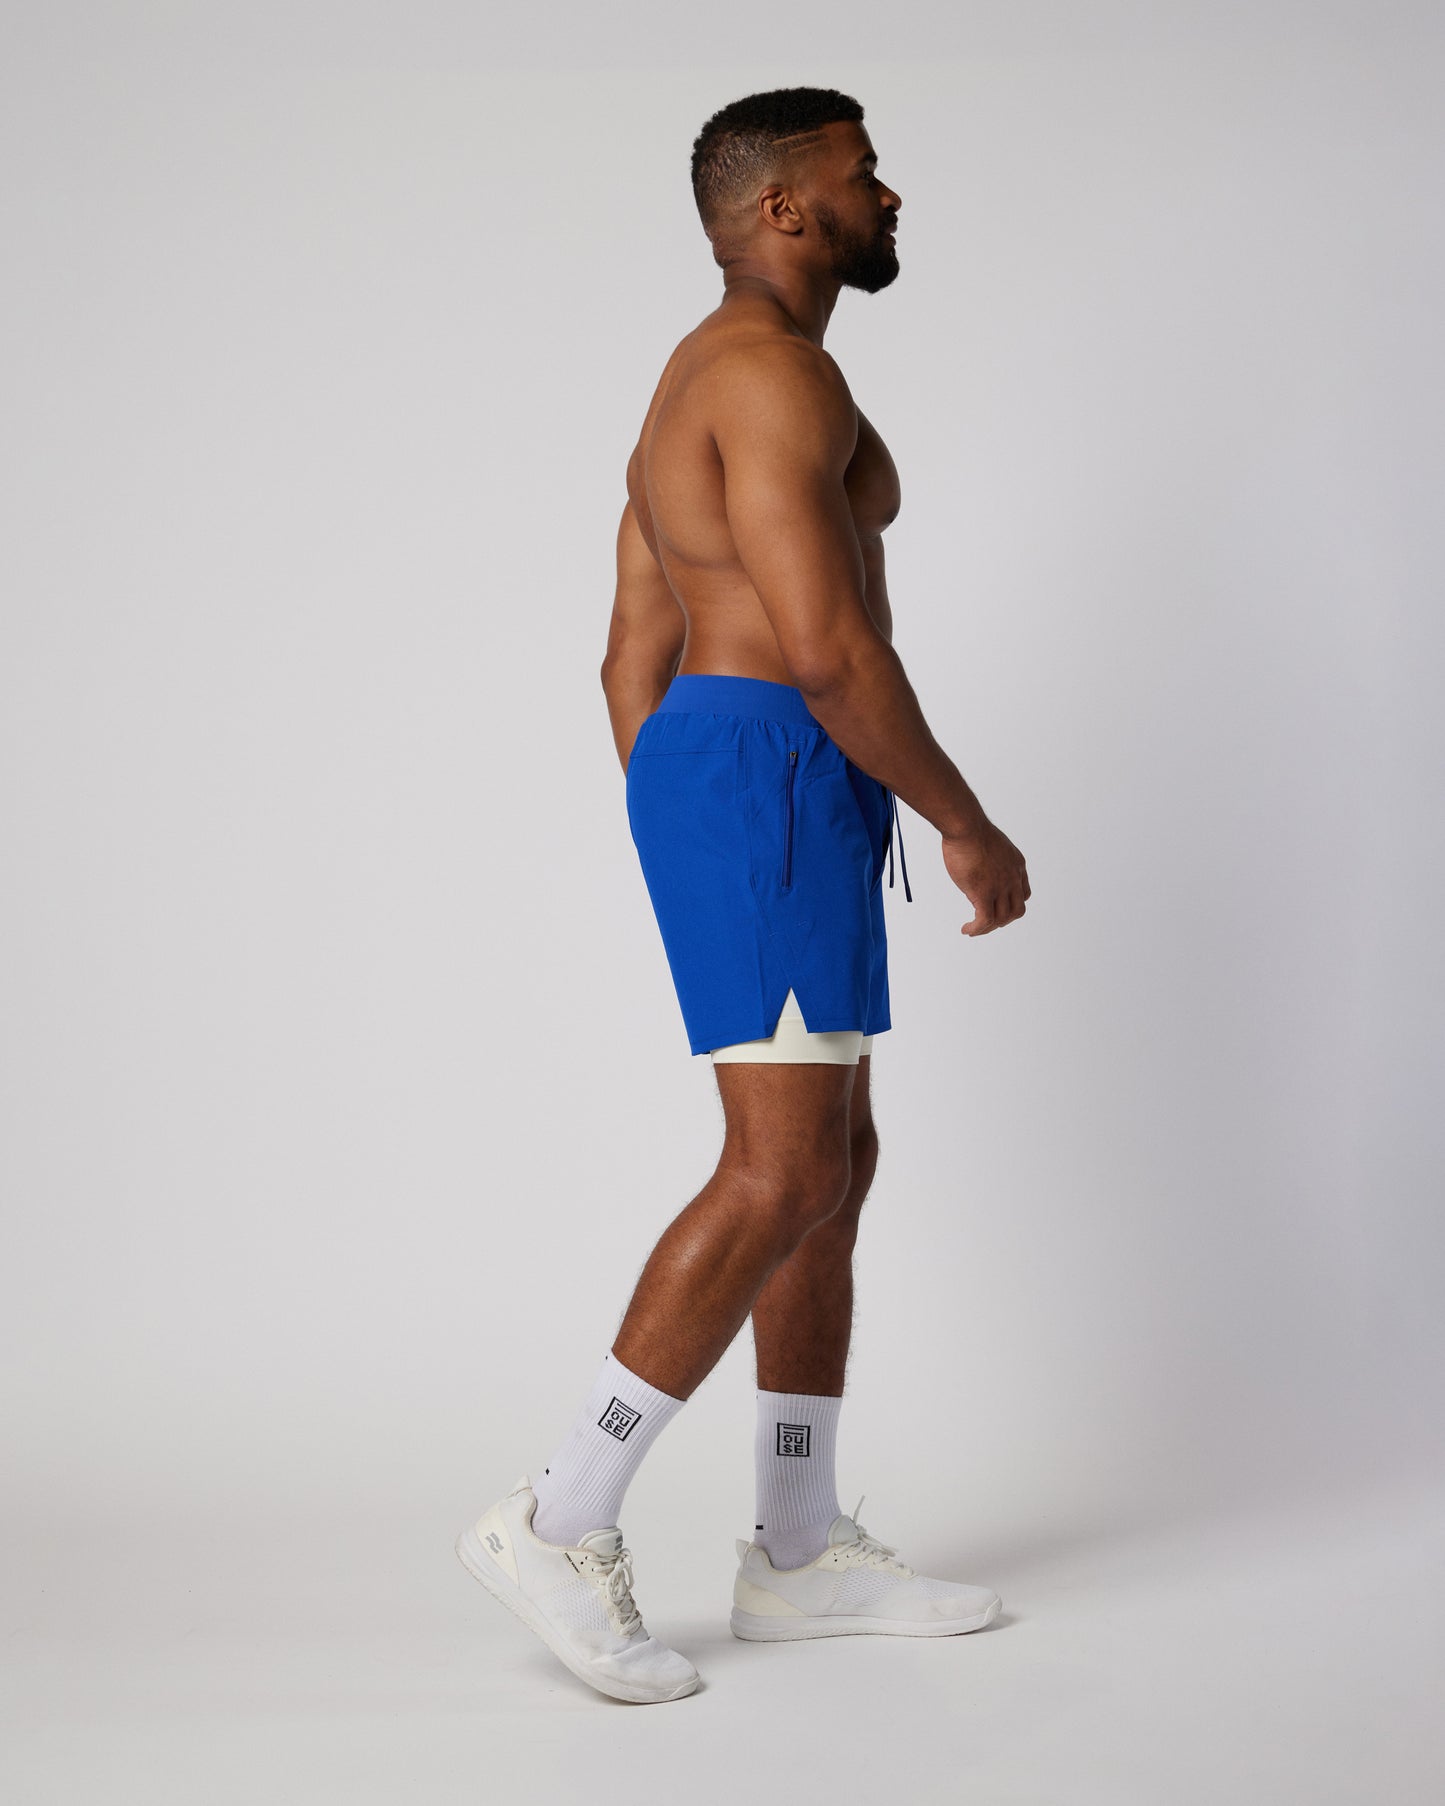 Mens lined sports shorts in blue and white